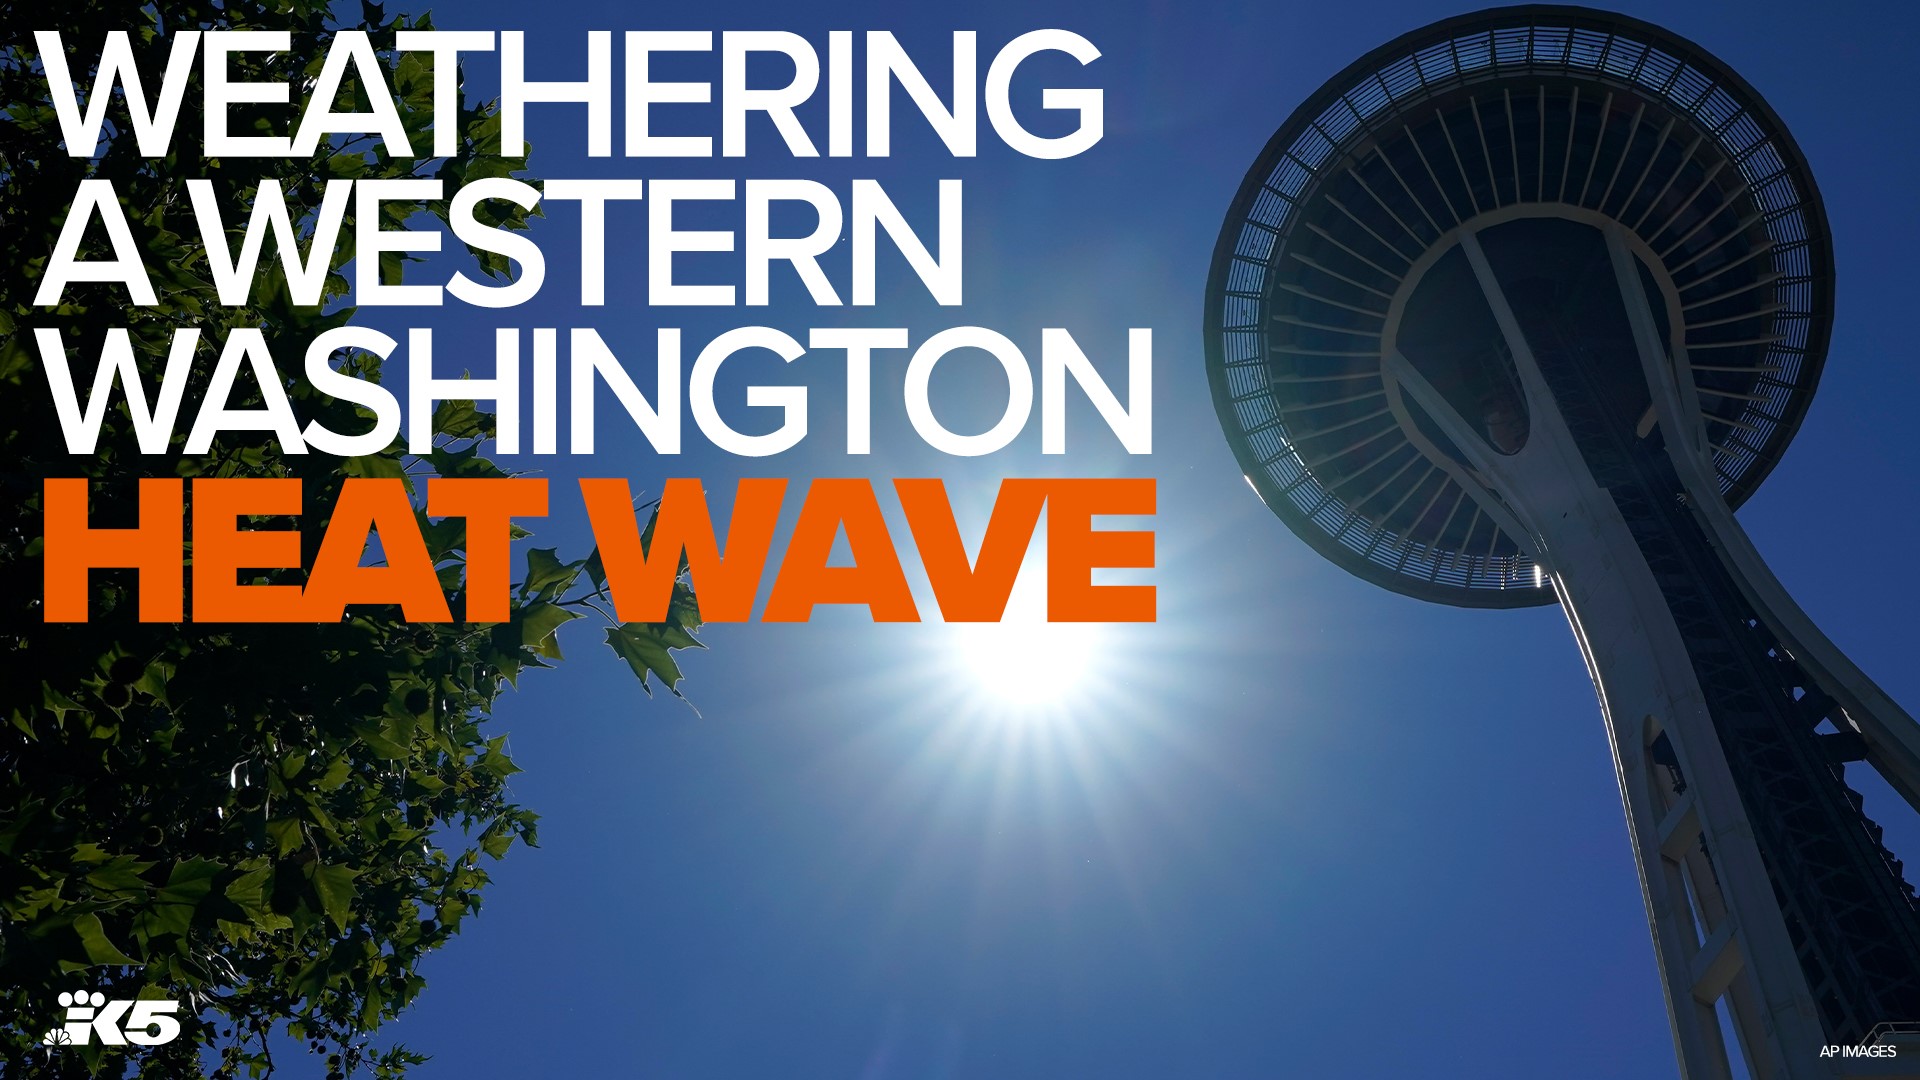 It's about to heat up and KING 5's Chief Meteorologist Mike Everett has everything you need to know